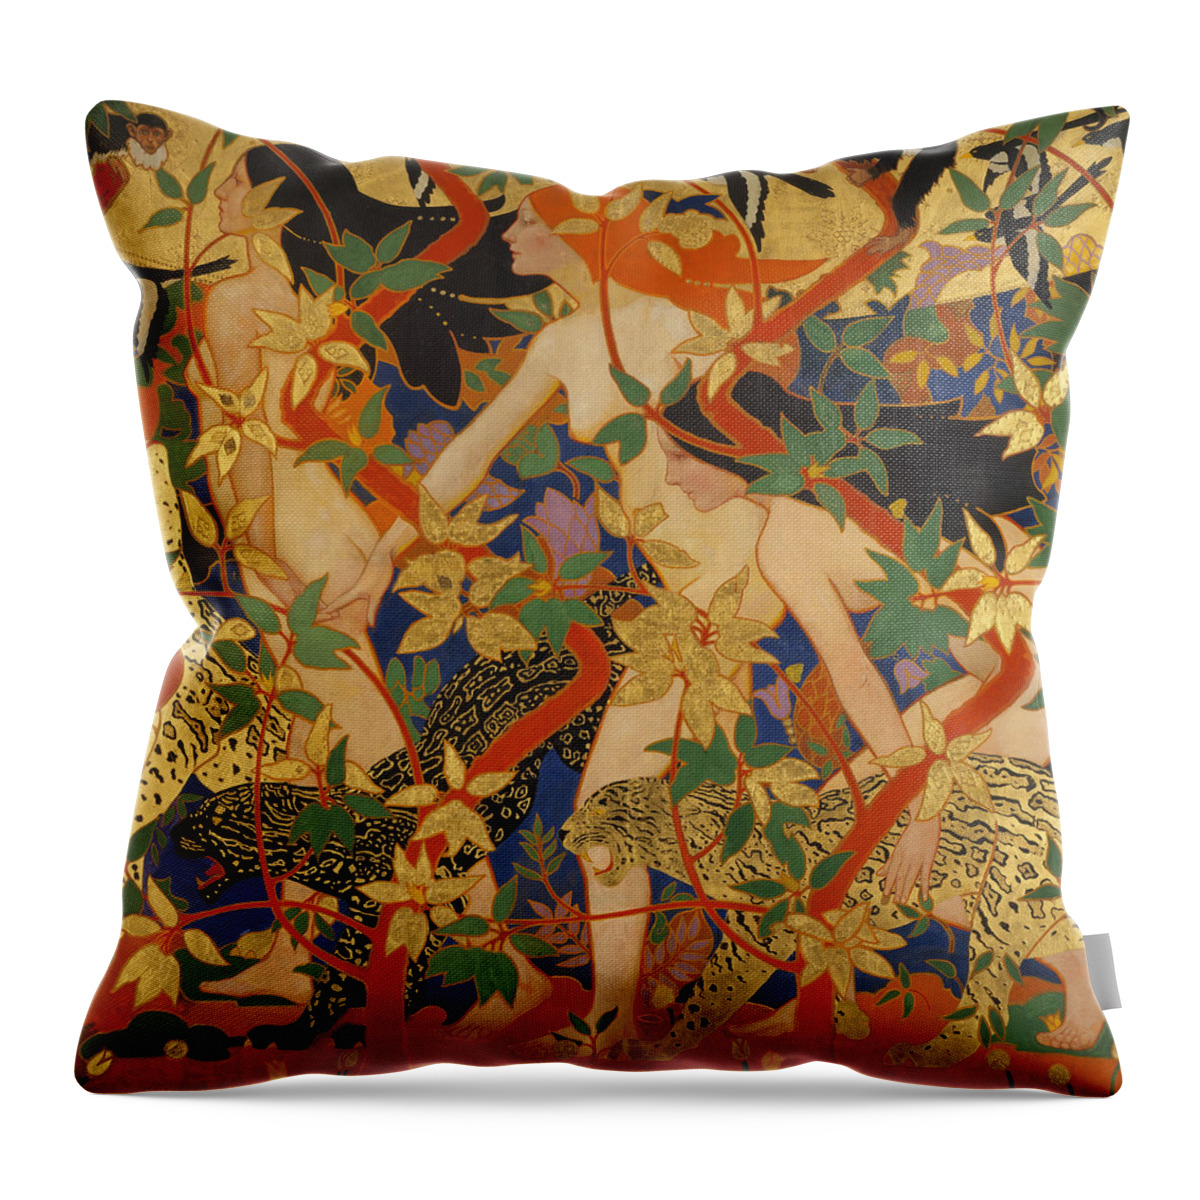 Robert Burns Throw Pillow featuring the painting Diana And Her Nymphs by Robert Burns